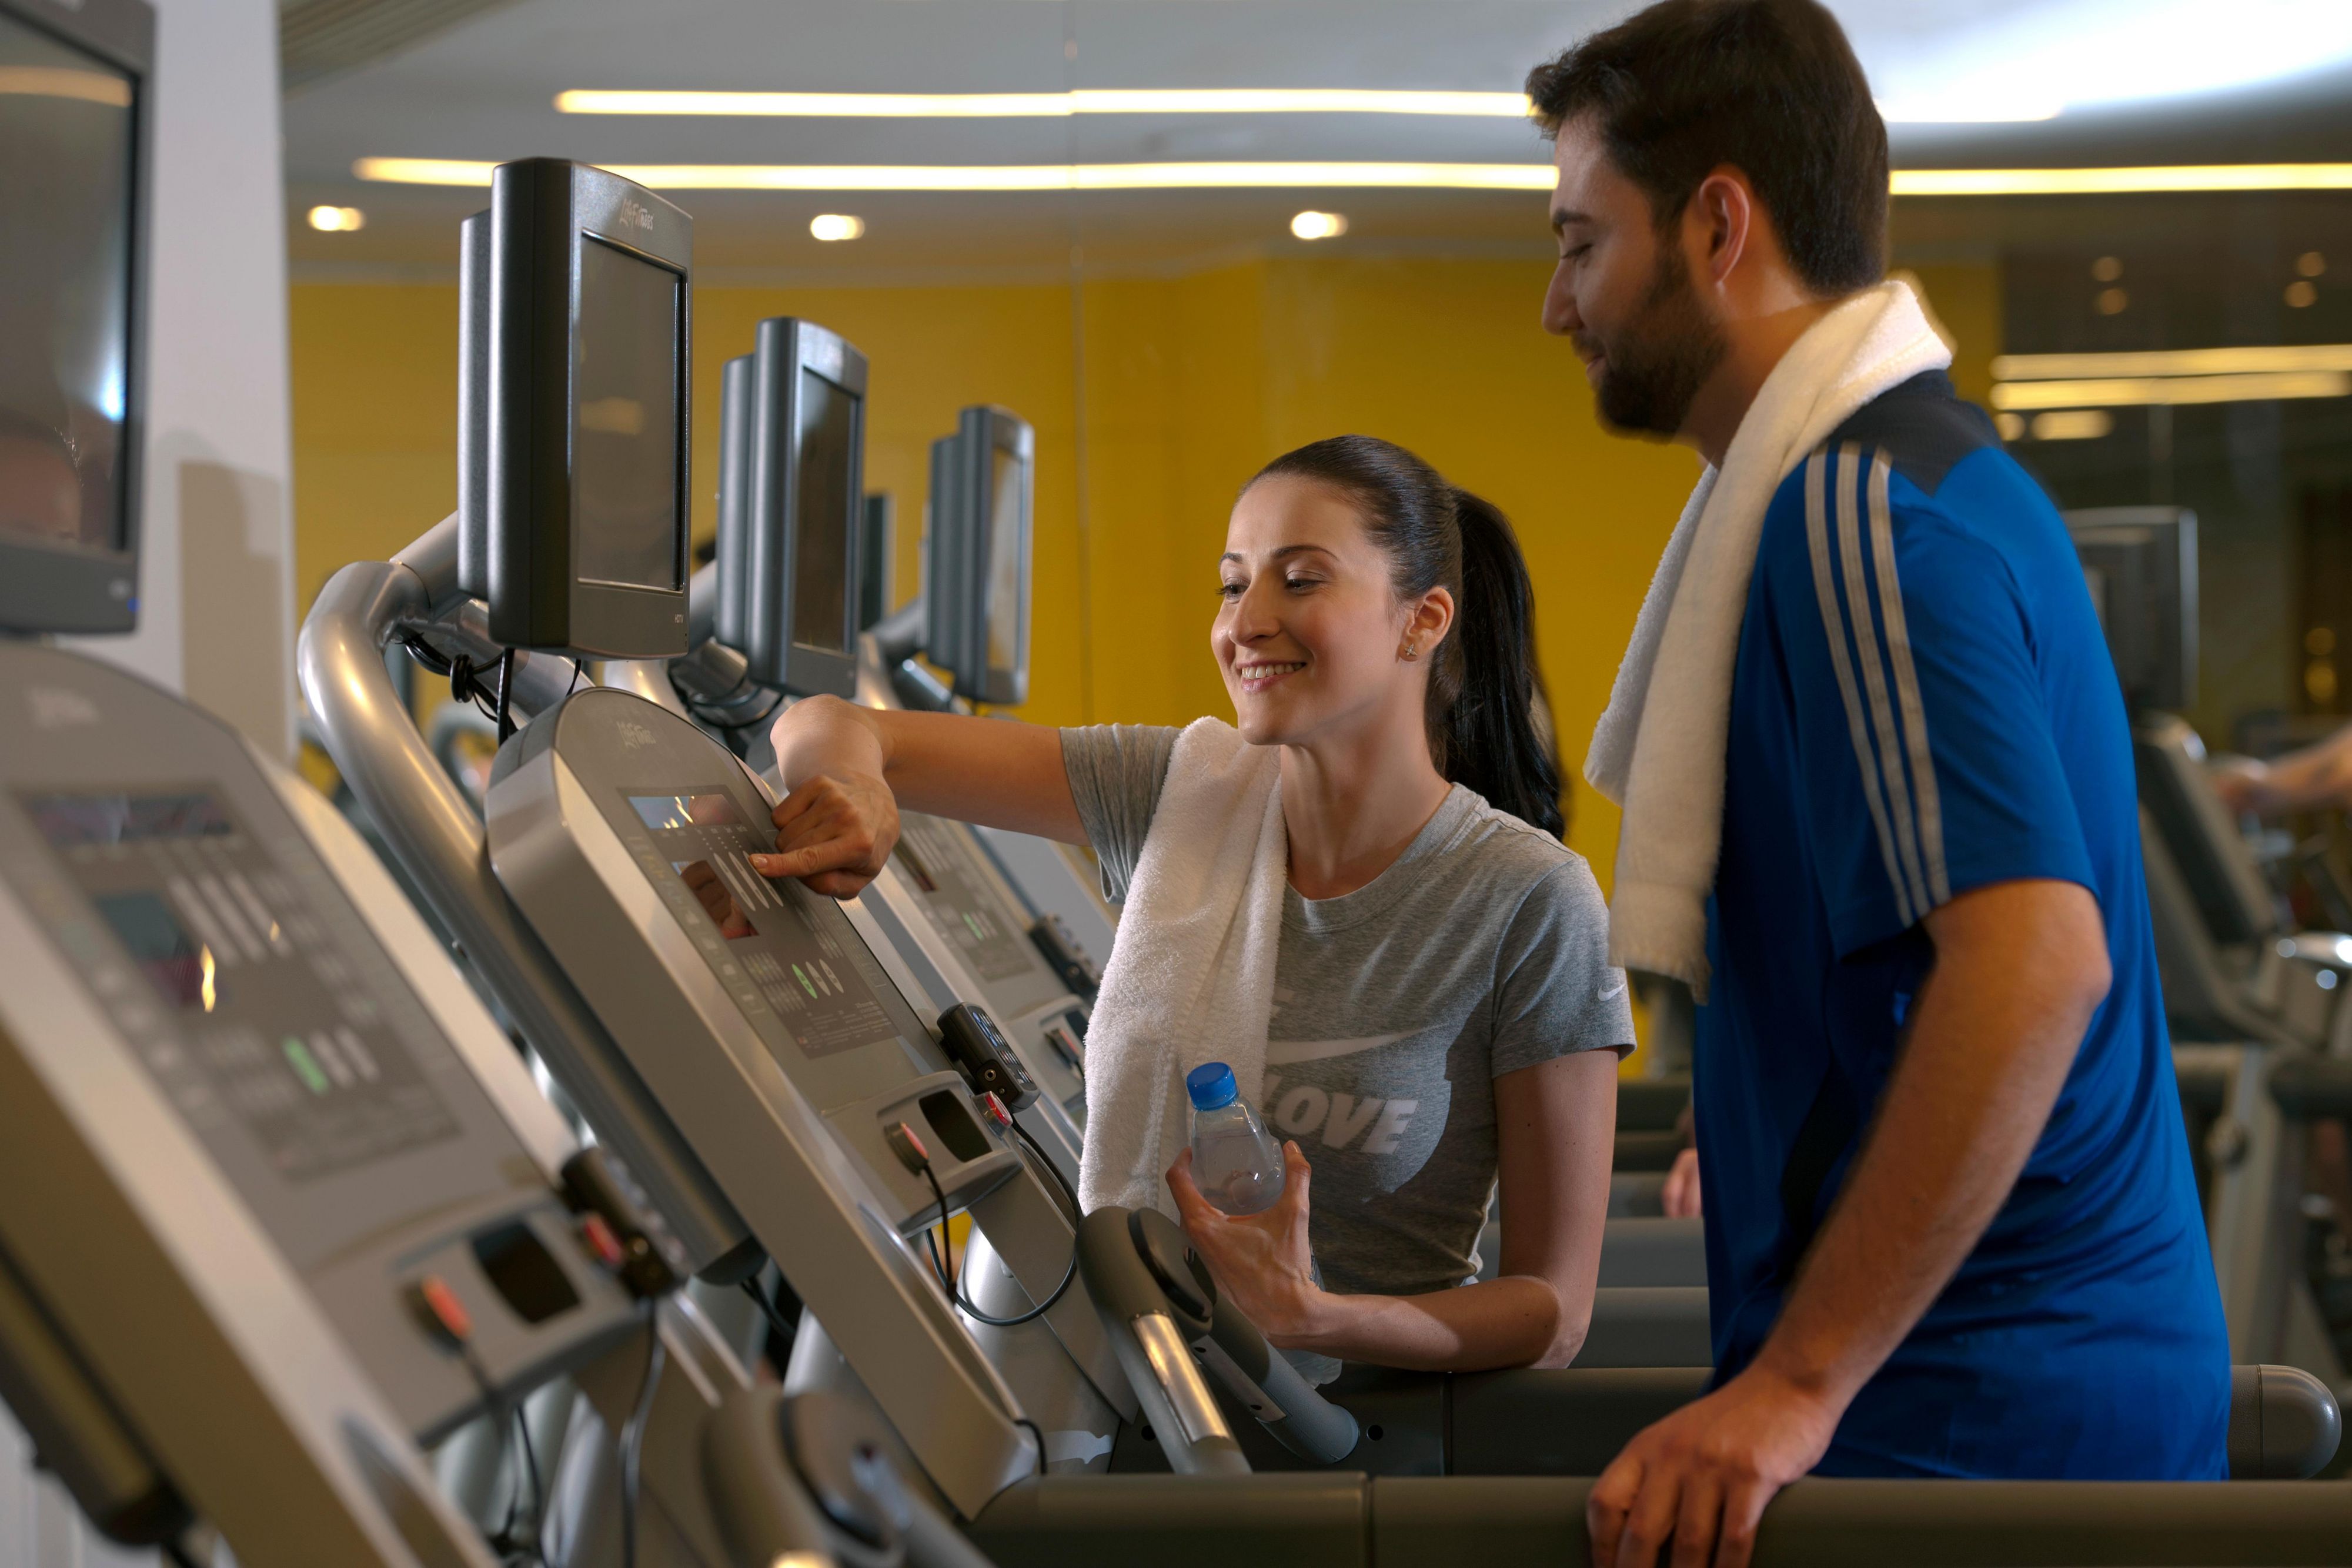 Get a good workout at our 24-hour Fitness Club